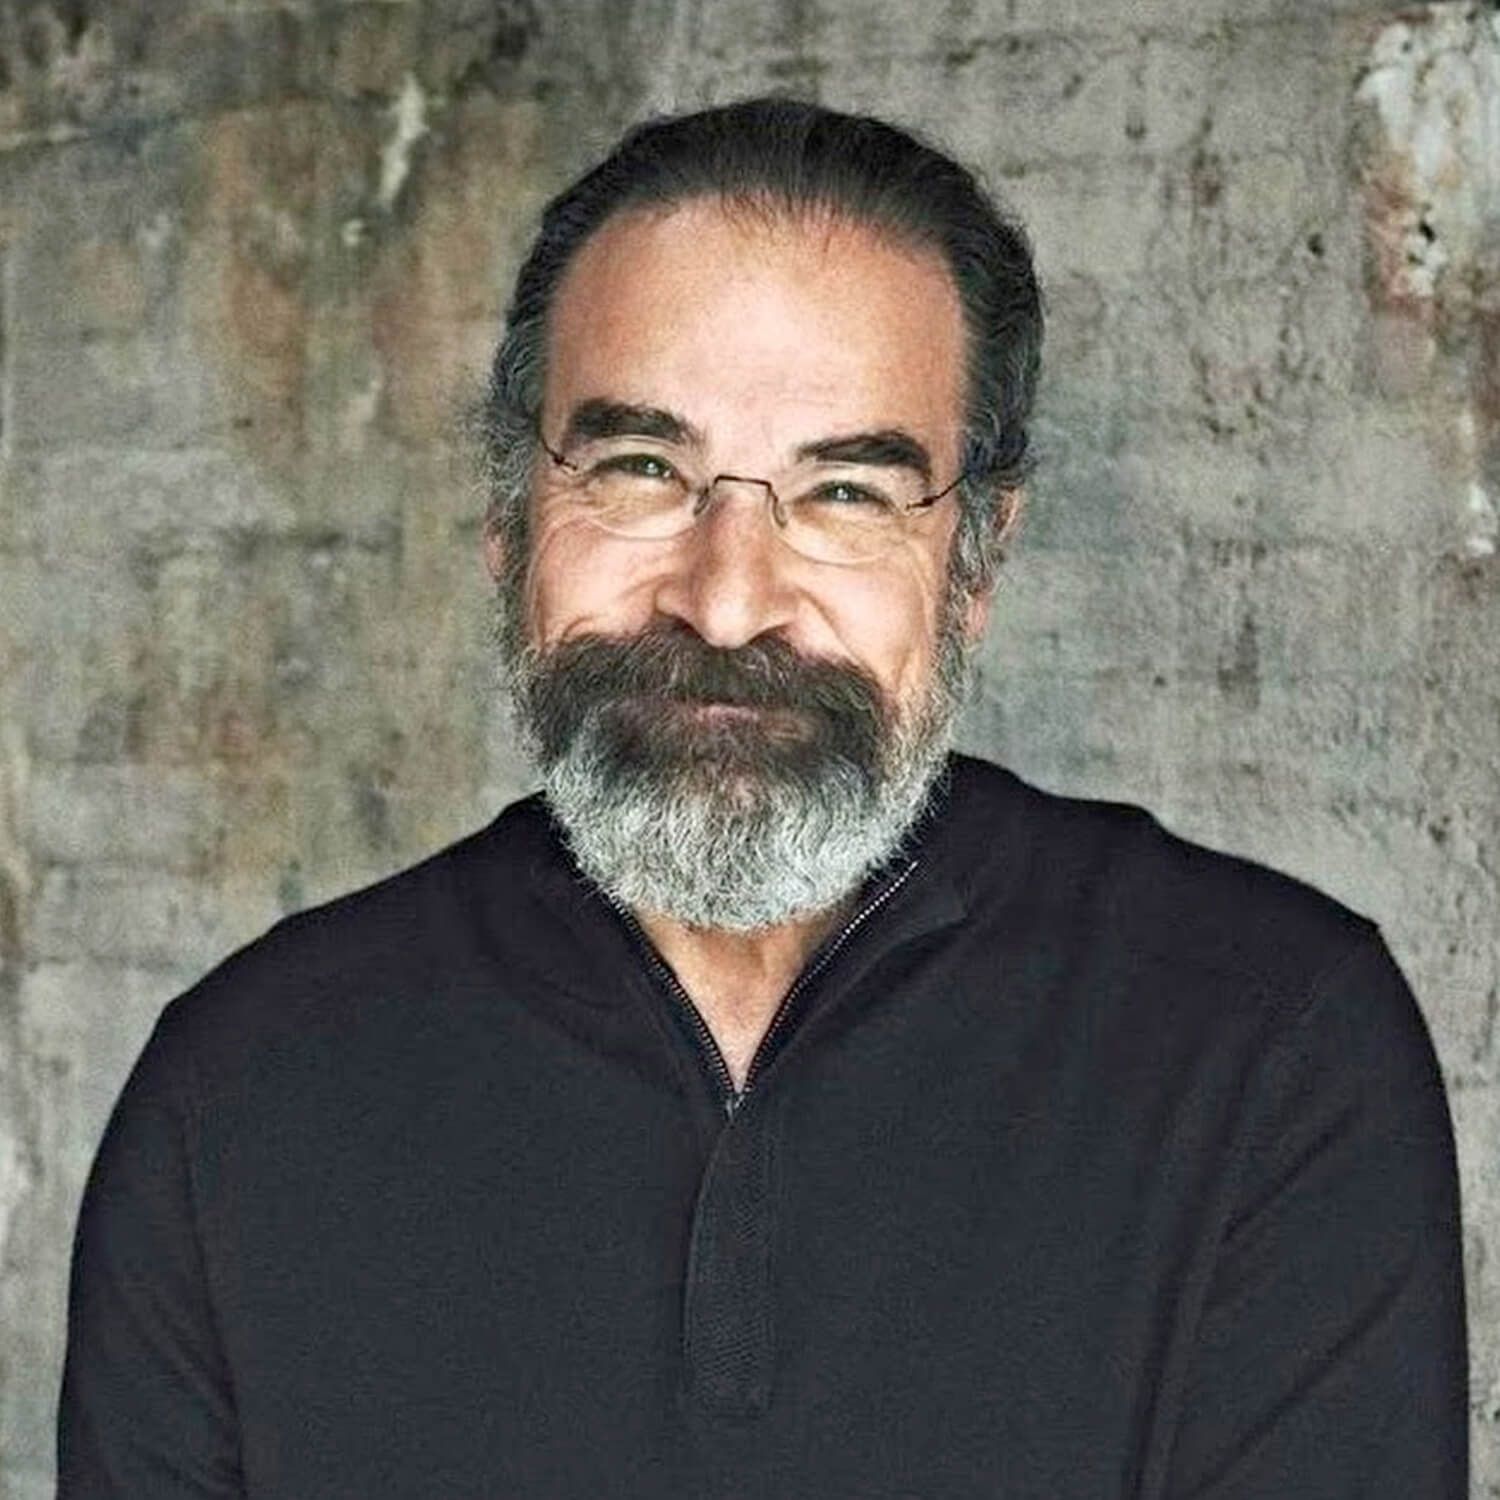 Mandy Patinkin in a Black Color Top Portrait